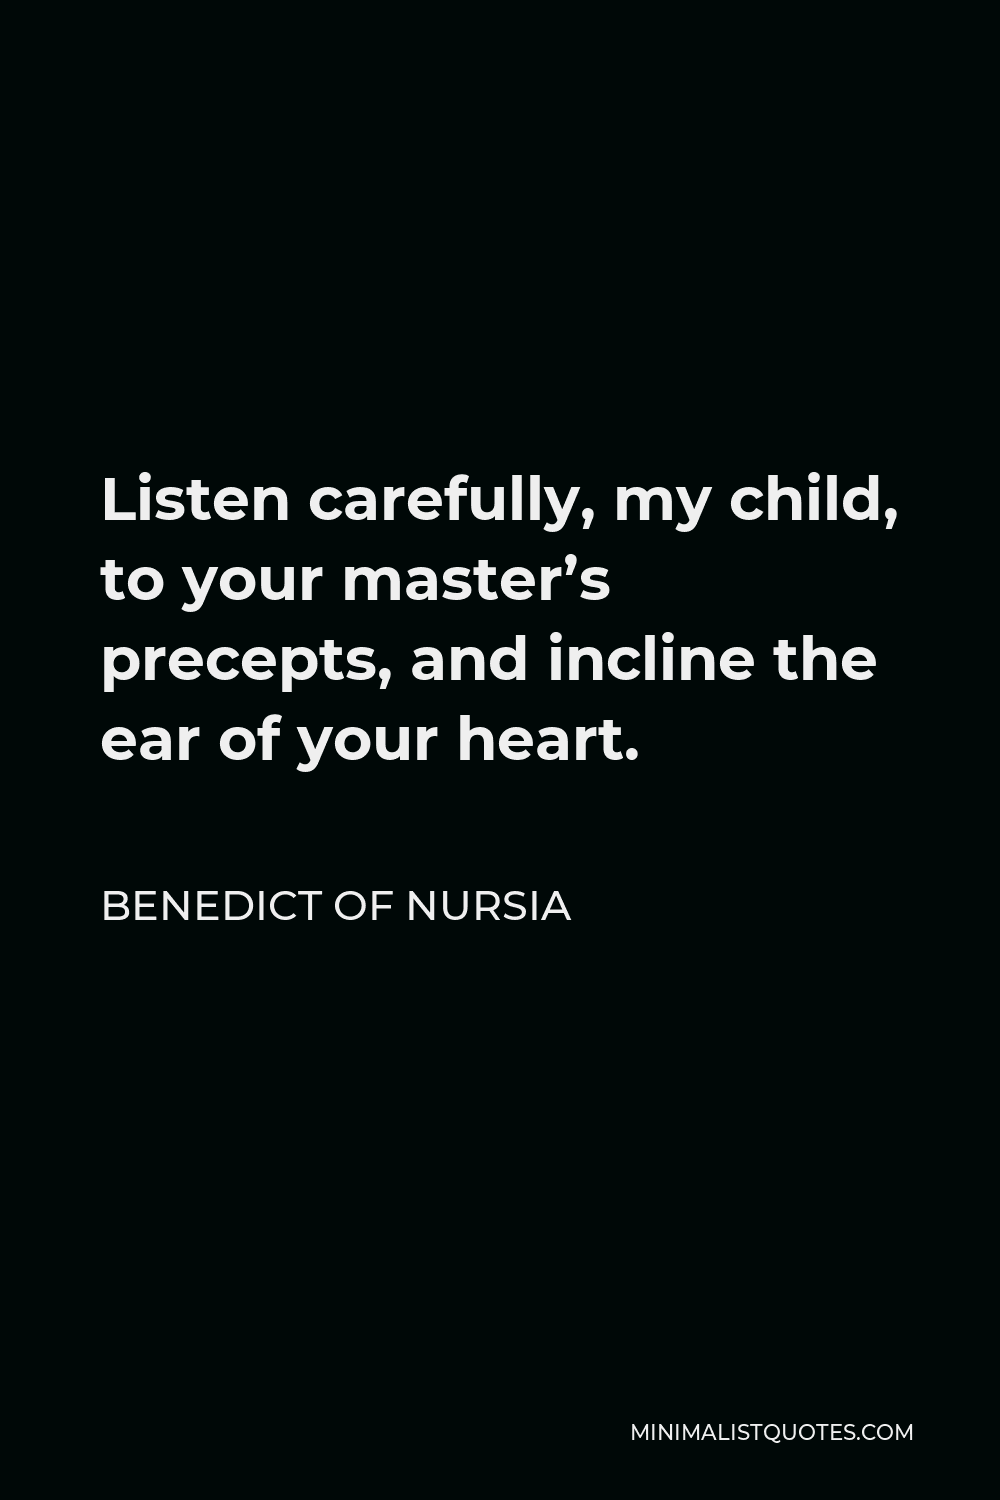 Benedict of Nursia Quote - Listen carefully, my child, to your master’s precepts, and incline the ear of your heart.